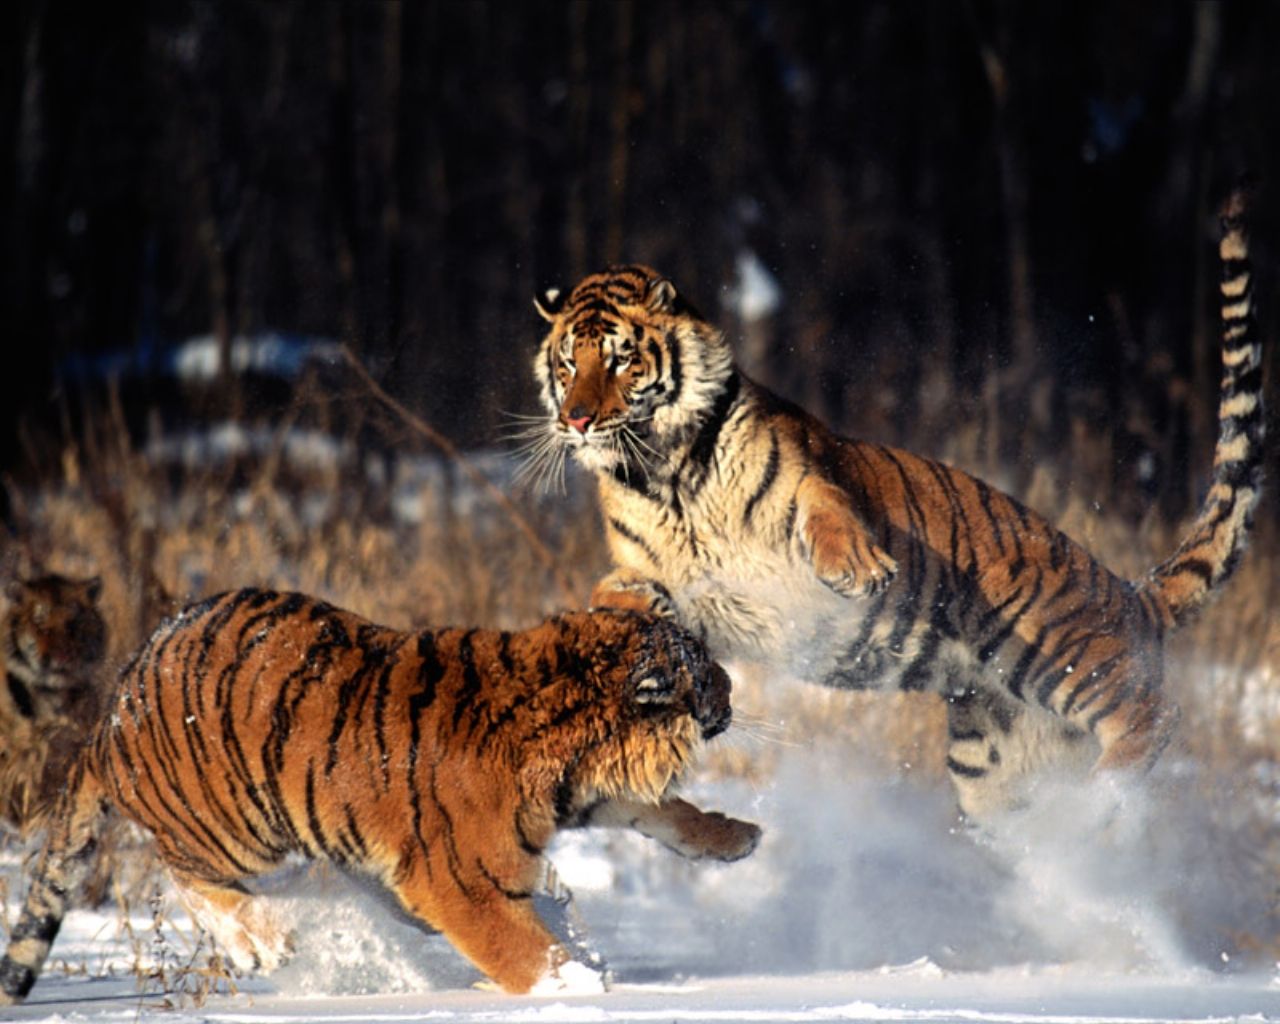 Tiger Wallpapers. Images and animals Tiger pictures (727)